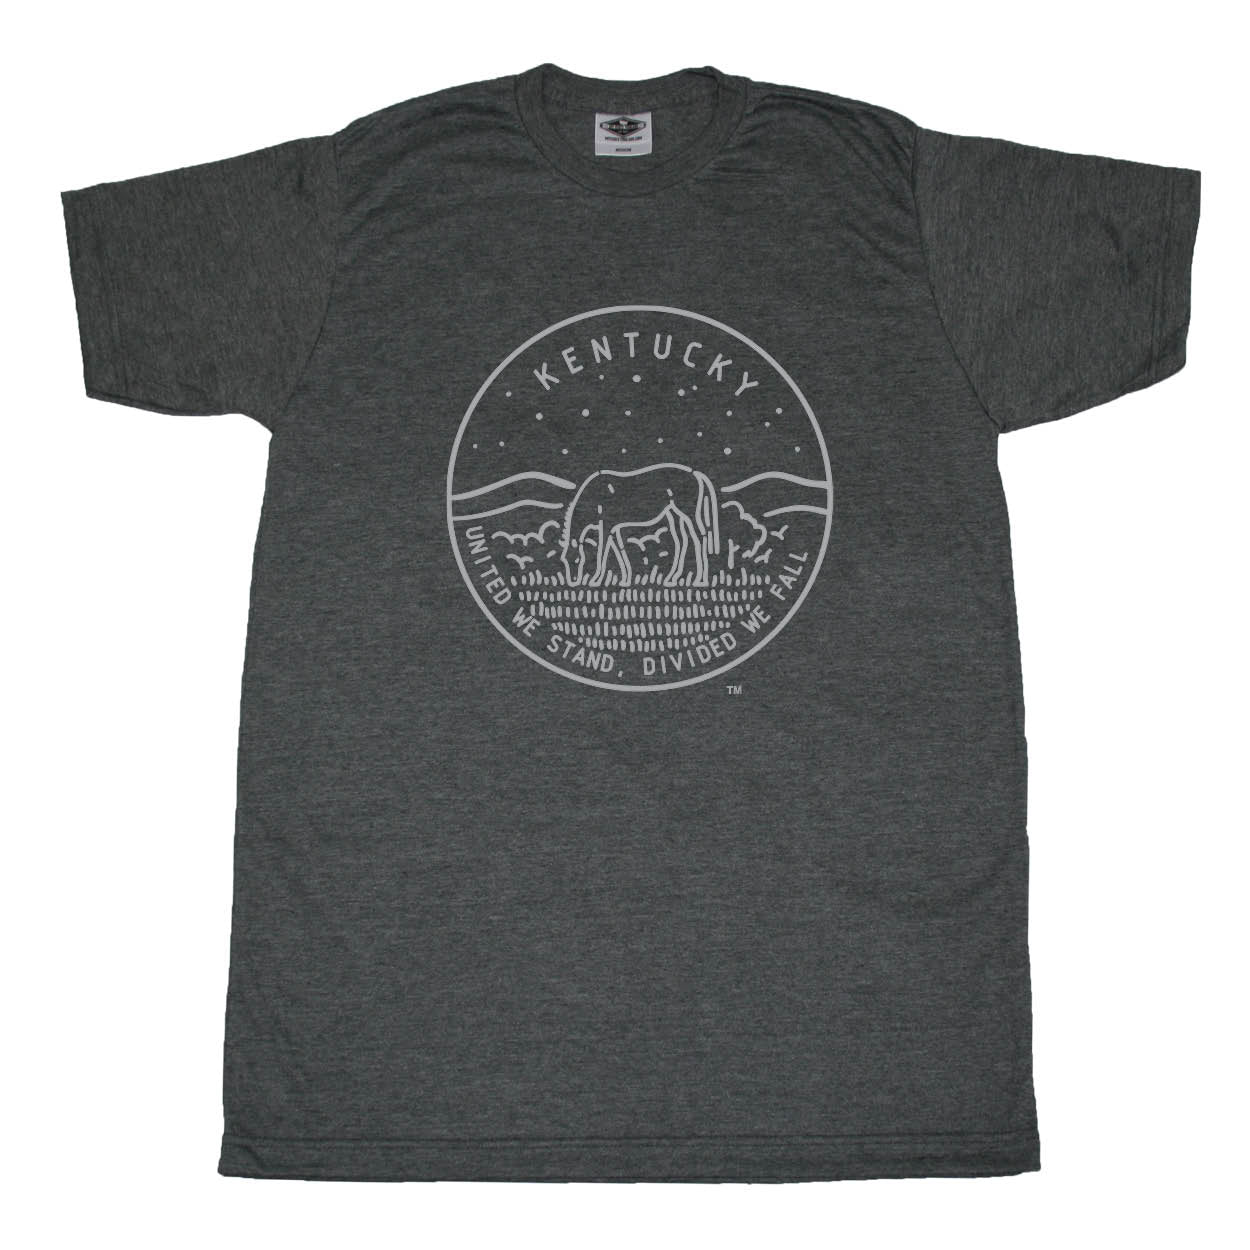 KENTUCKY TEE | STATE SEAL | UNITED WE STAND, DIVIDED WE FALL